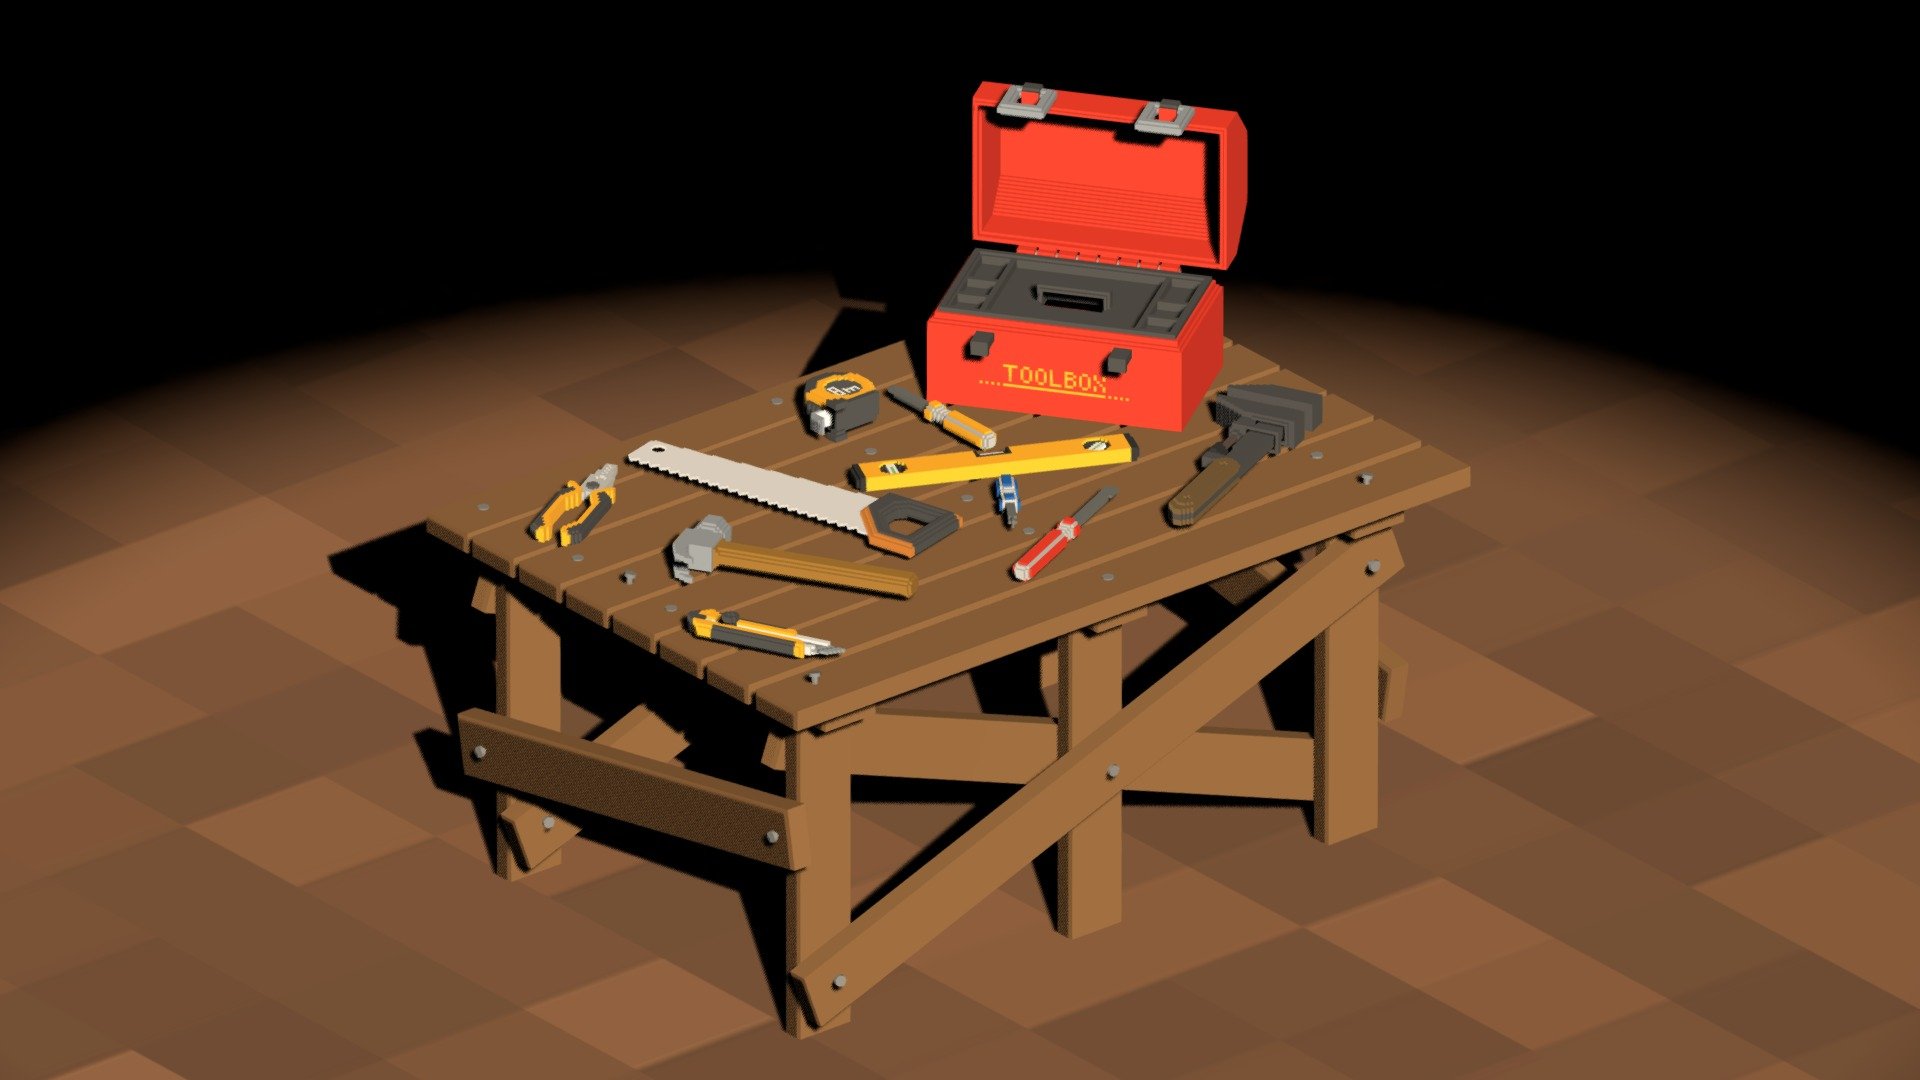 Voxel ToolBox &amp; 10 Tools 3D Voxel model created in MagicaVoxel Editor.

Available Formats: .vox (MagicaVoxel)” .obj + mtl” .qb

All Formats Size: 102 MB

Zip File Size: 2.23 MB

(Polys Count: 11114) (Verts Count: 15779)

Your feedback and rating are important for us :) - Voxel Tools - Buy Royalty Free 3D model by SHUBBAK3D 3d model